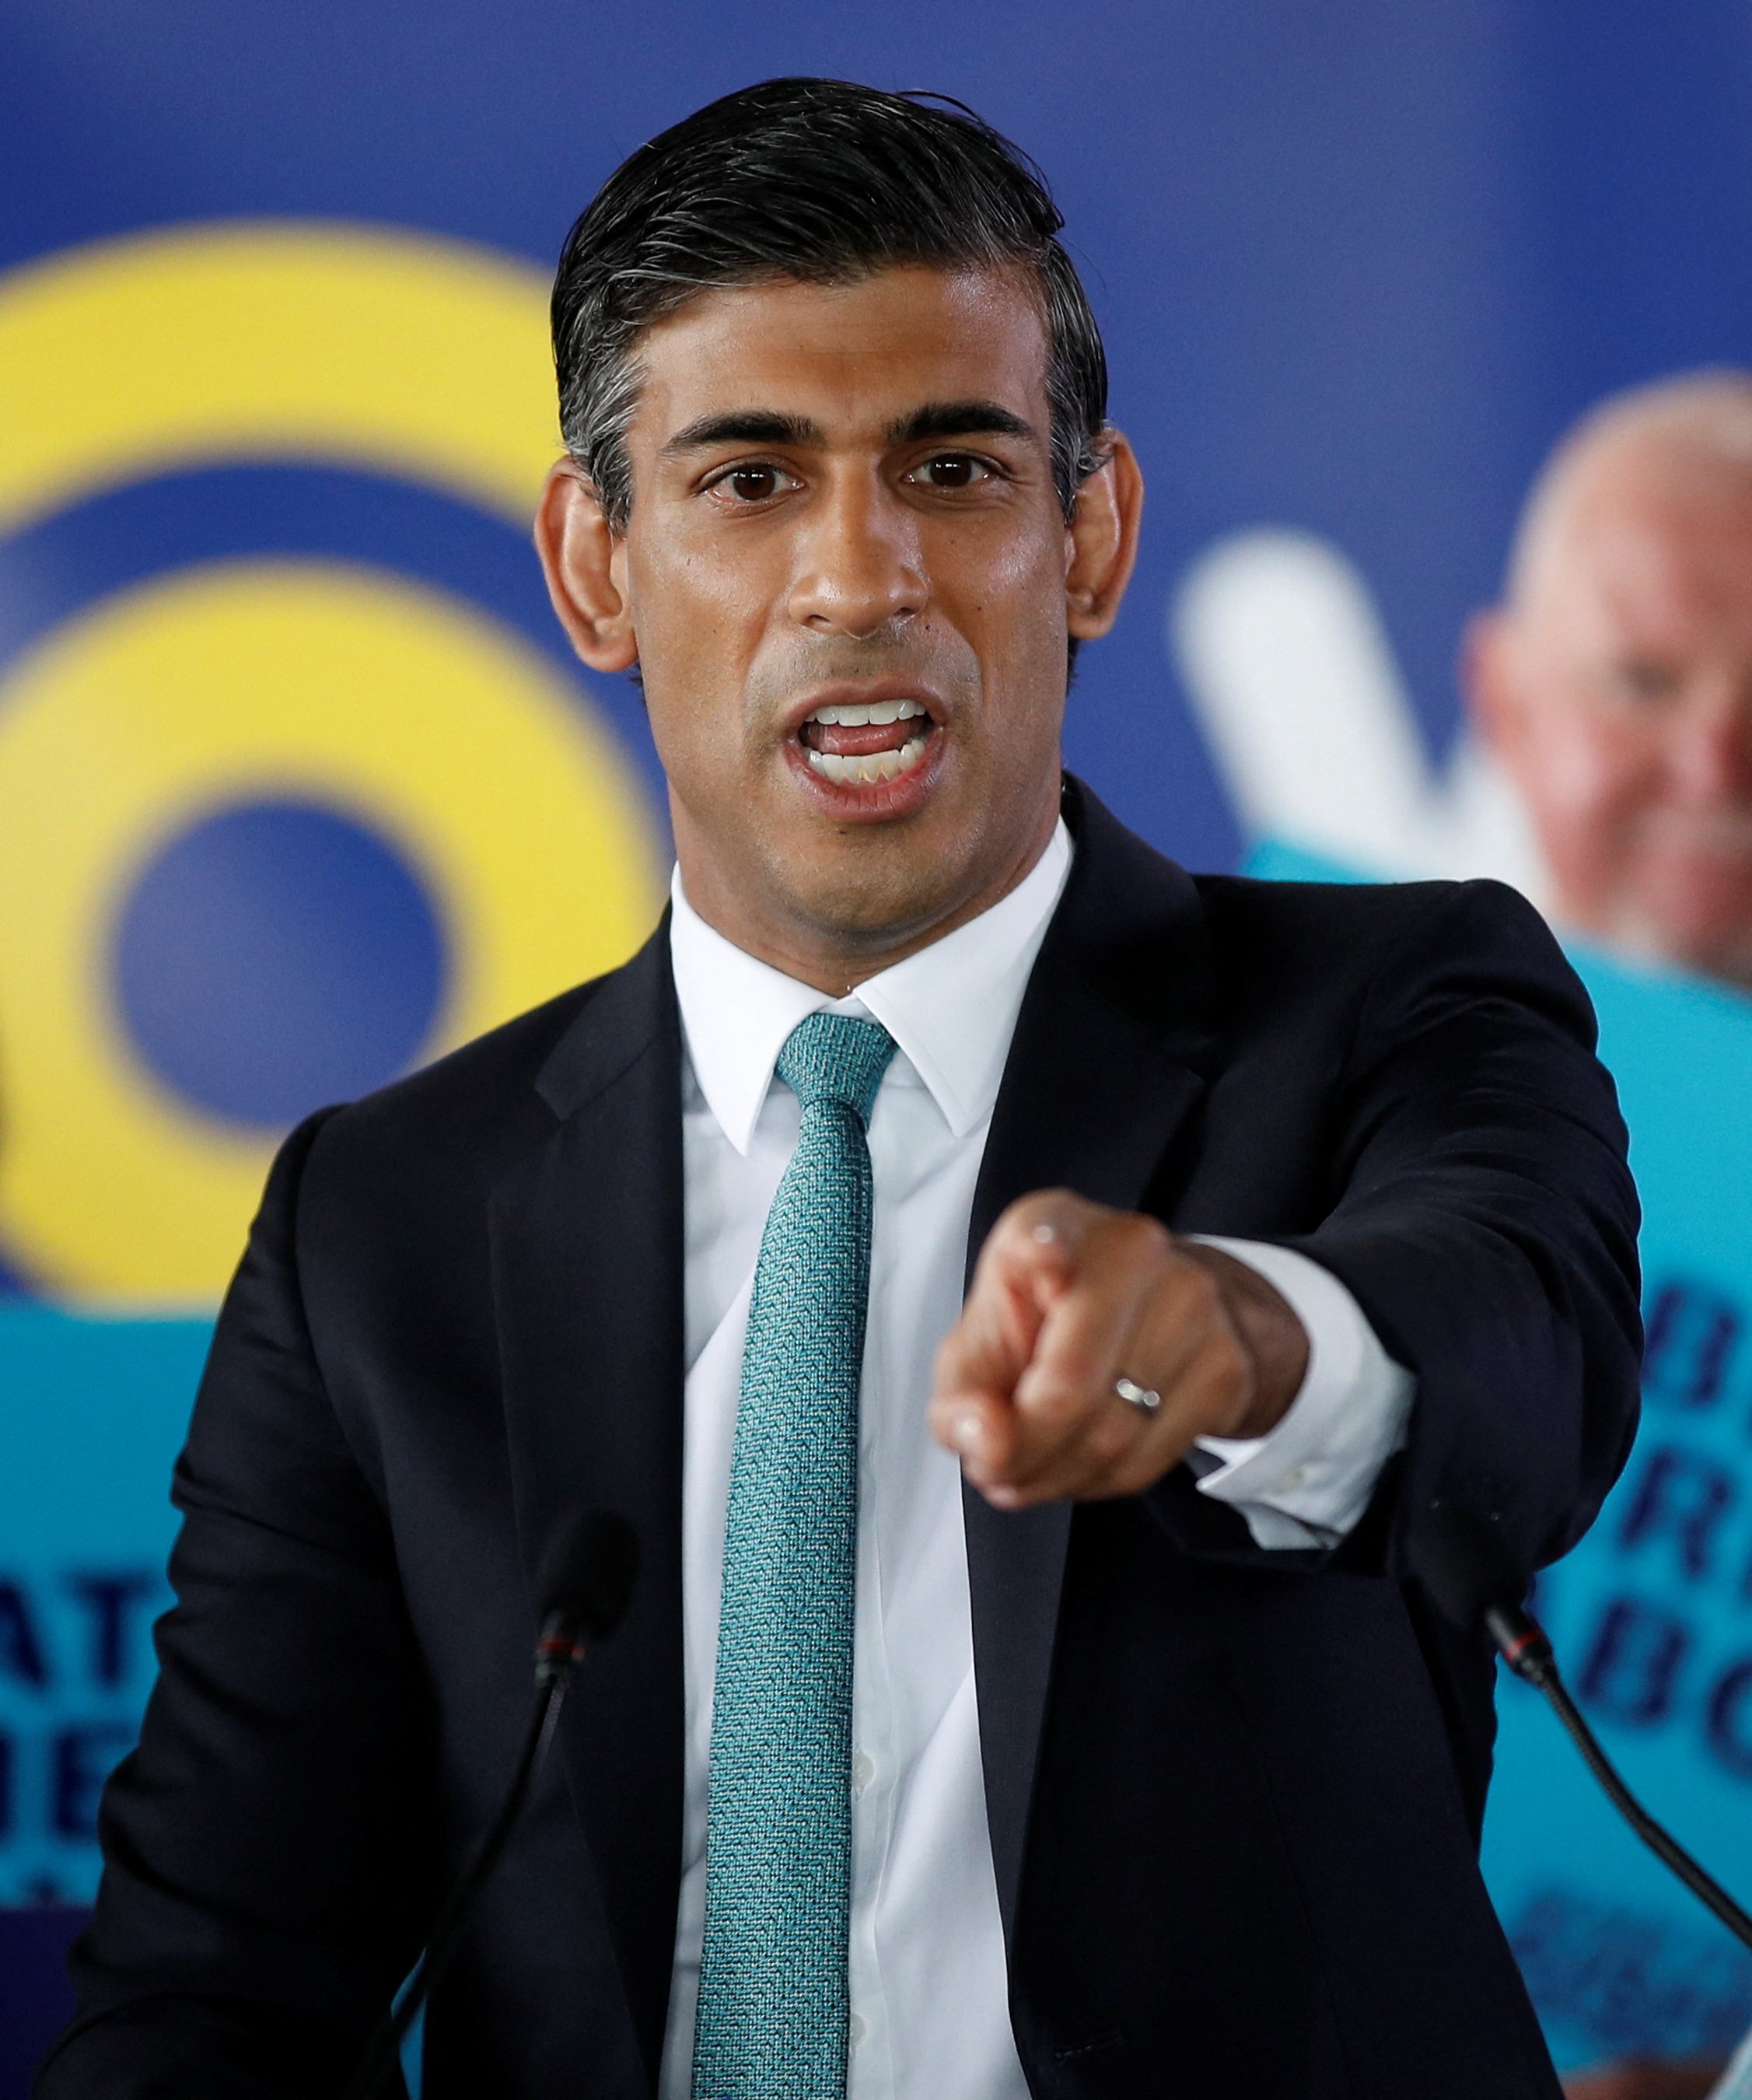 Rishi Sunak speaks at a Conservative Party leadership campaign event in Grantham, Britain, in July. Three months after losing the race to become British prime minister, he replaced the woman who beat him, Liz Truss. Photo: Reuters